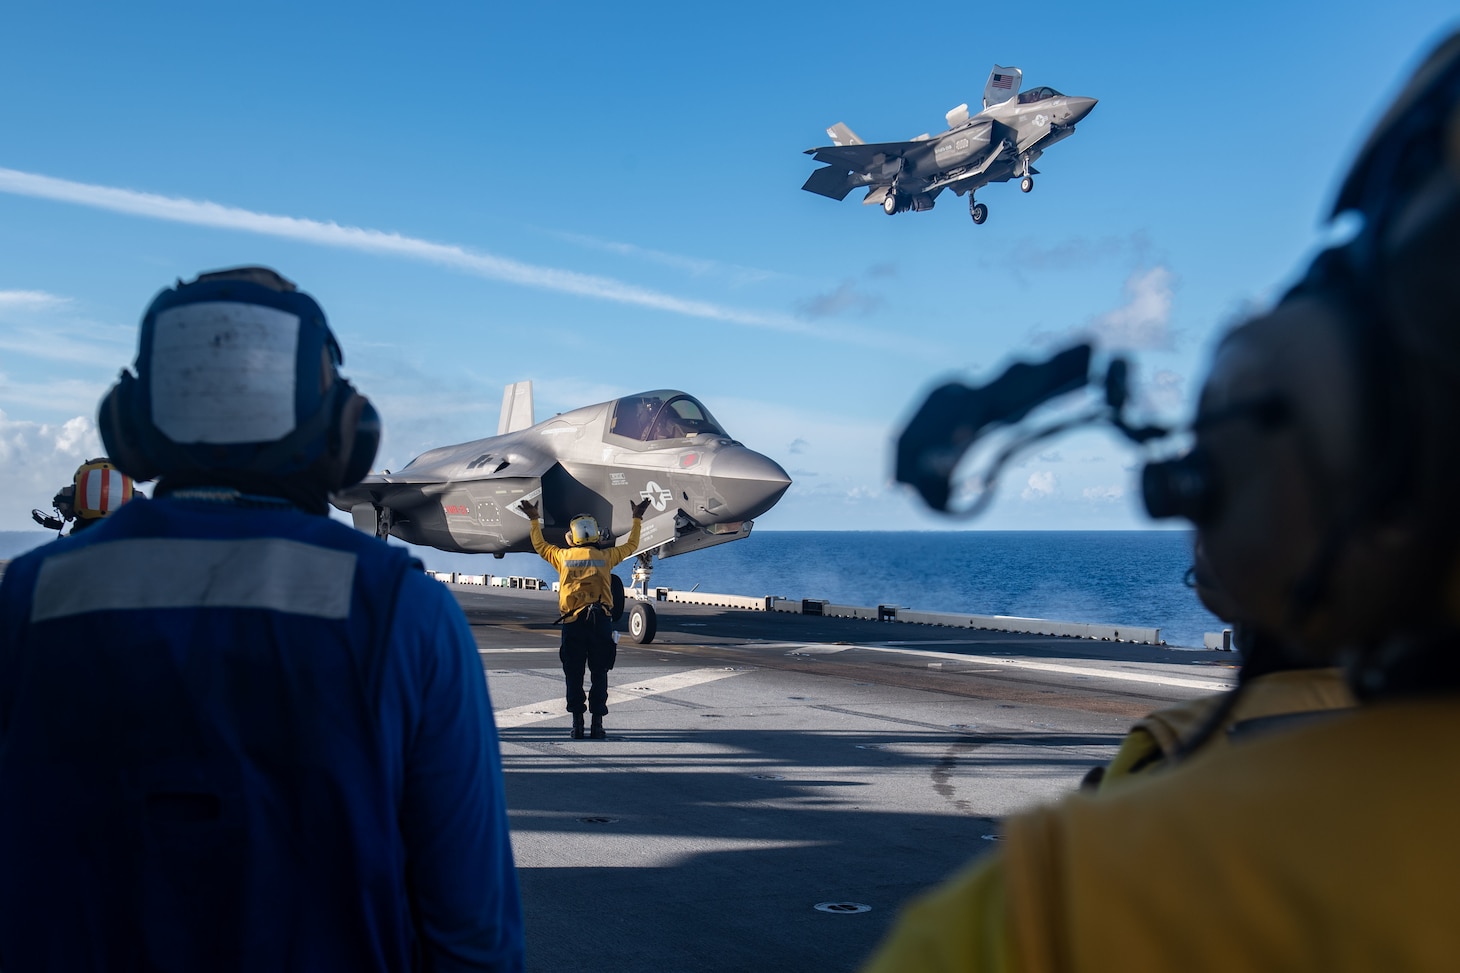 PHILIPPINE SEA (Aug. 20, 2021) An F-35B Lightning II fighter aircraft from Marine Fighter Attack Squadron (VMFA) 211, embarked on the Royal Navy aircraft carrier HMS Queen Elizabeth (R08), lands on the flight deck of the forward-deployed amphibious assault ship USS America (LHA 6) during flight operations between and America and the Royal Navy. America, flagship of the America Expeditionary Strike Group, along with the 31st Marine Expeditionary Unit, is operating in the U.S. 7th Fleet area of responsibility to enhance interoperability with allies and partners and serve as a ready response force to defend peace and stability in the Indo-Pacific region. (U.S. Navy photo by Mass Communication Specialist 3rd Class Matthew Cavenaile)